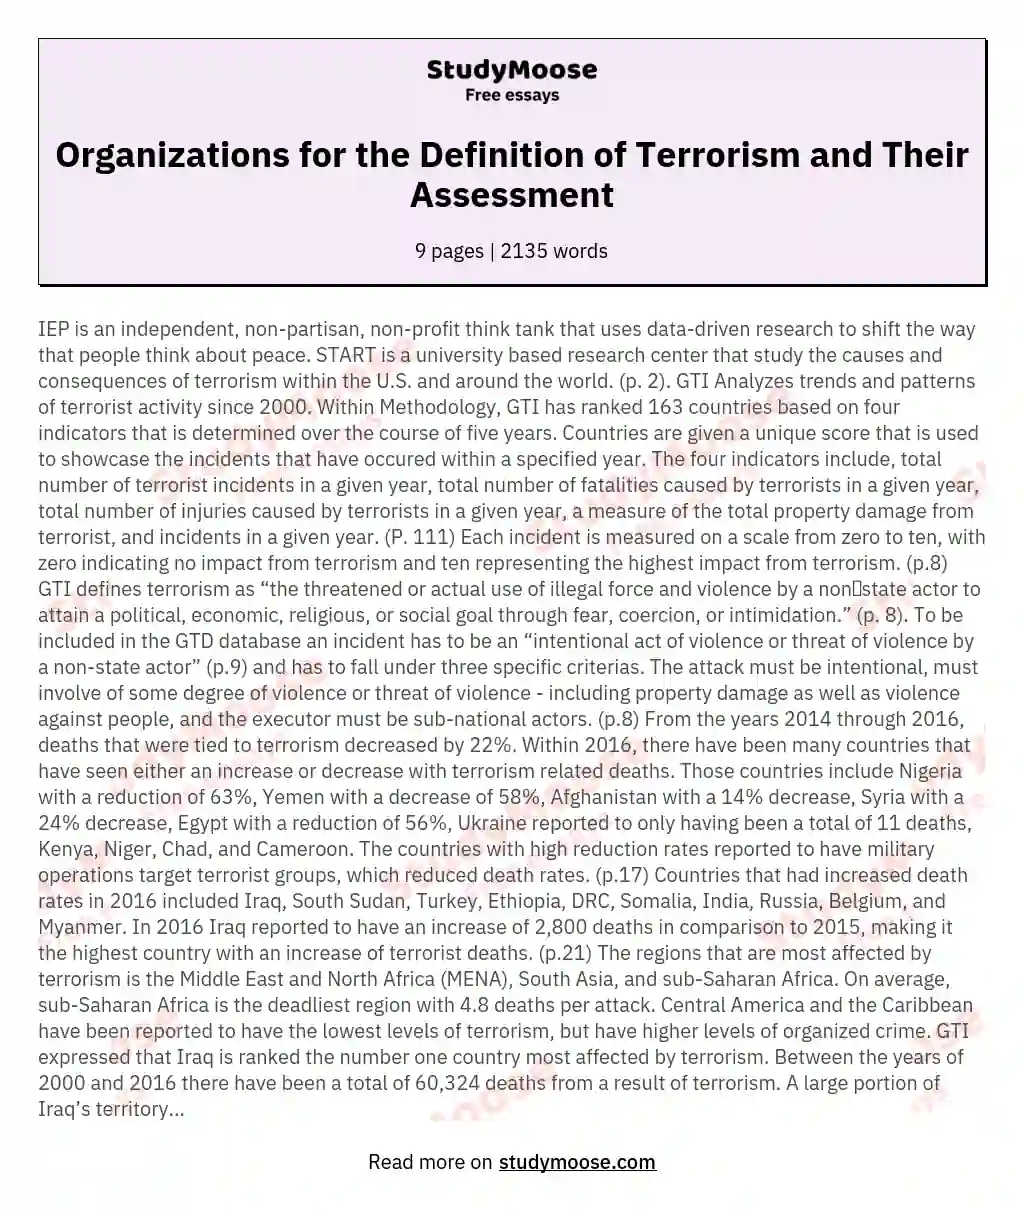 Organizations for the Definition of Terrorism and Their Assessment essay